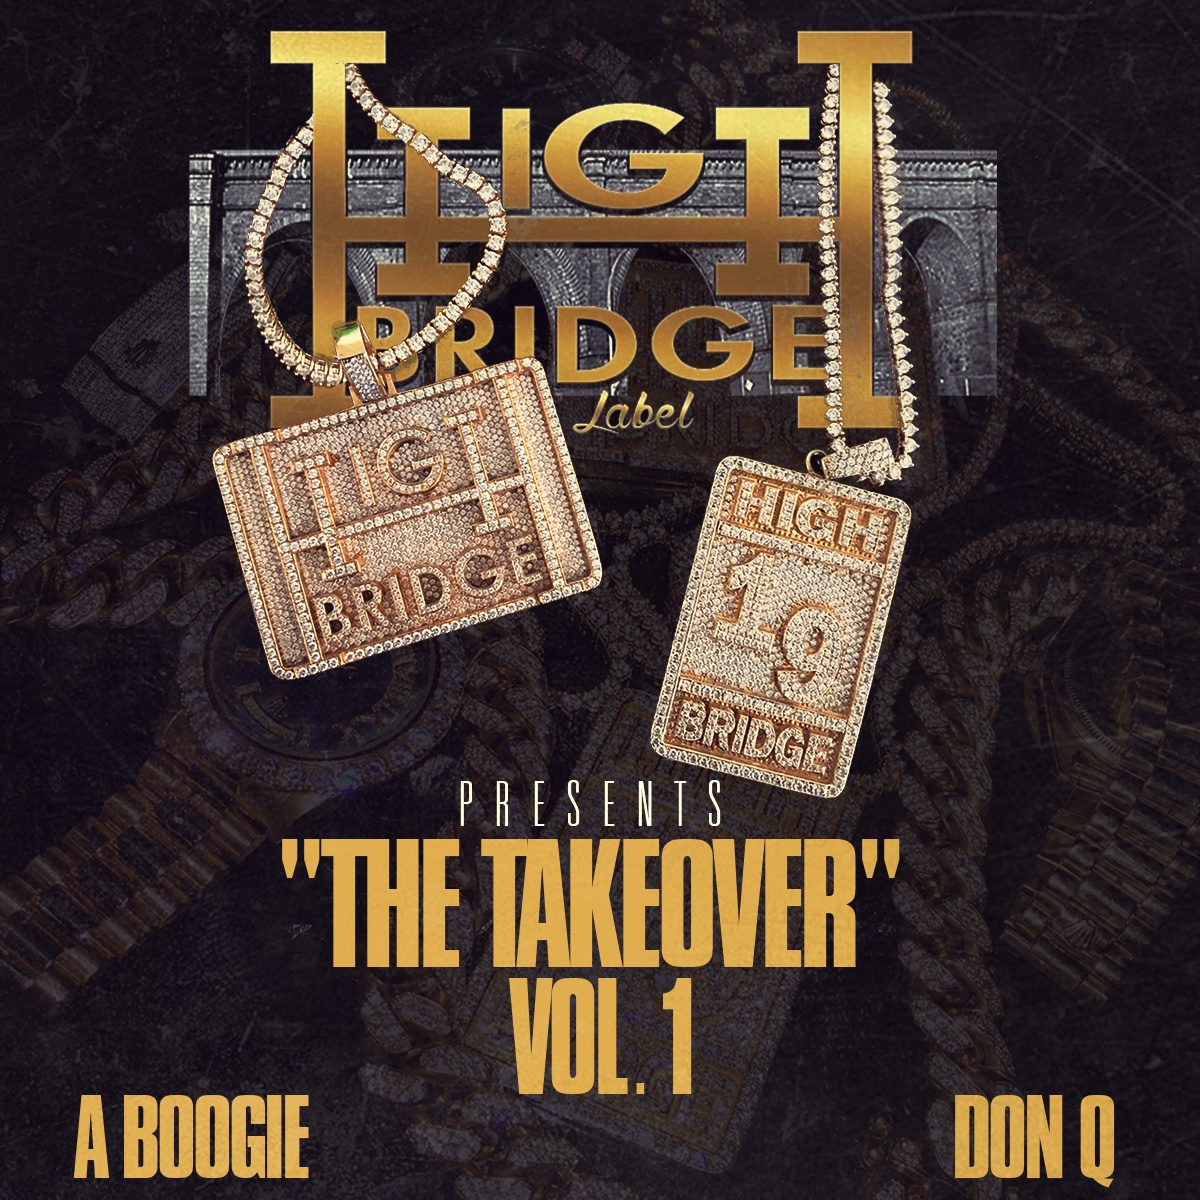 Highbridge the Label: The Takeover Vol.1